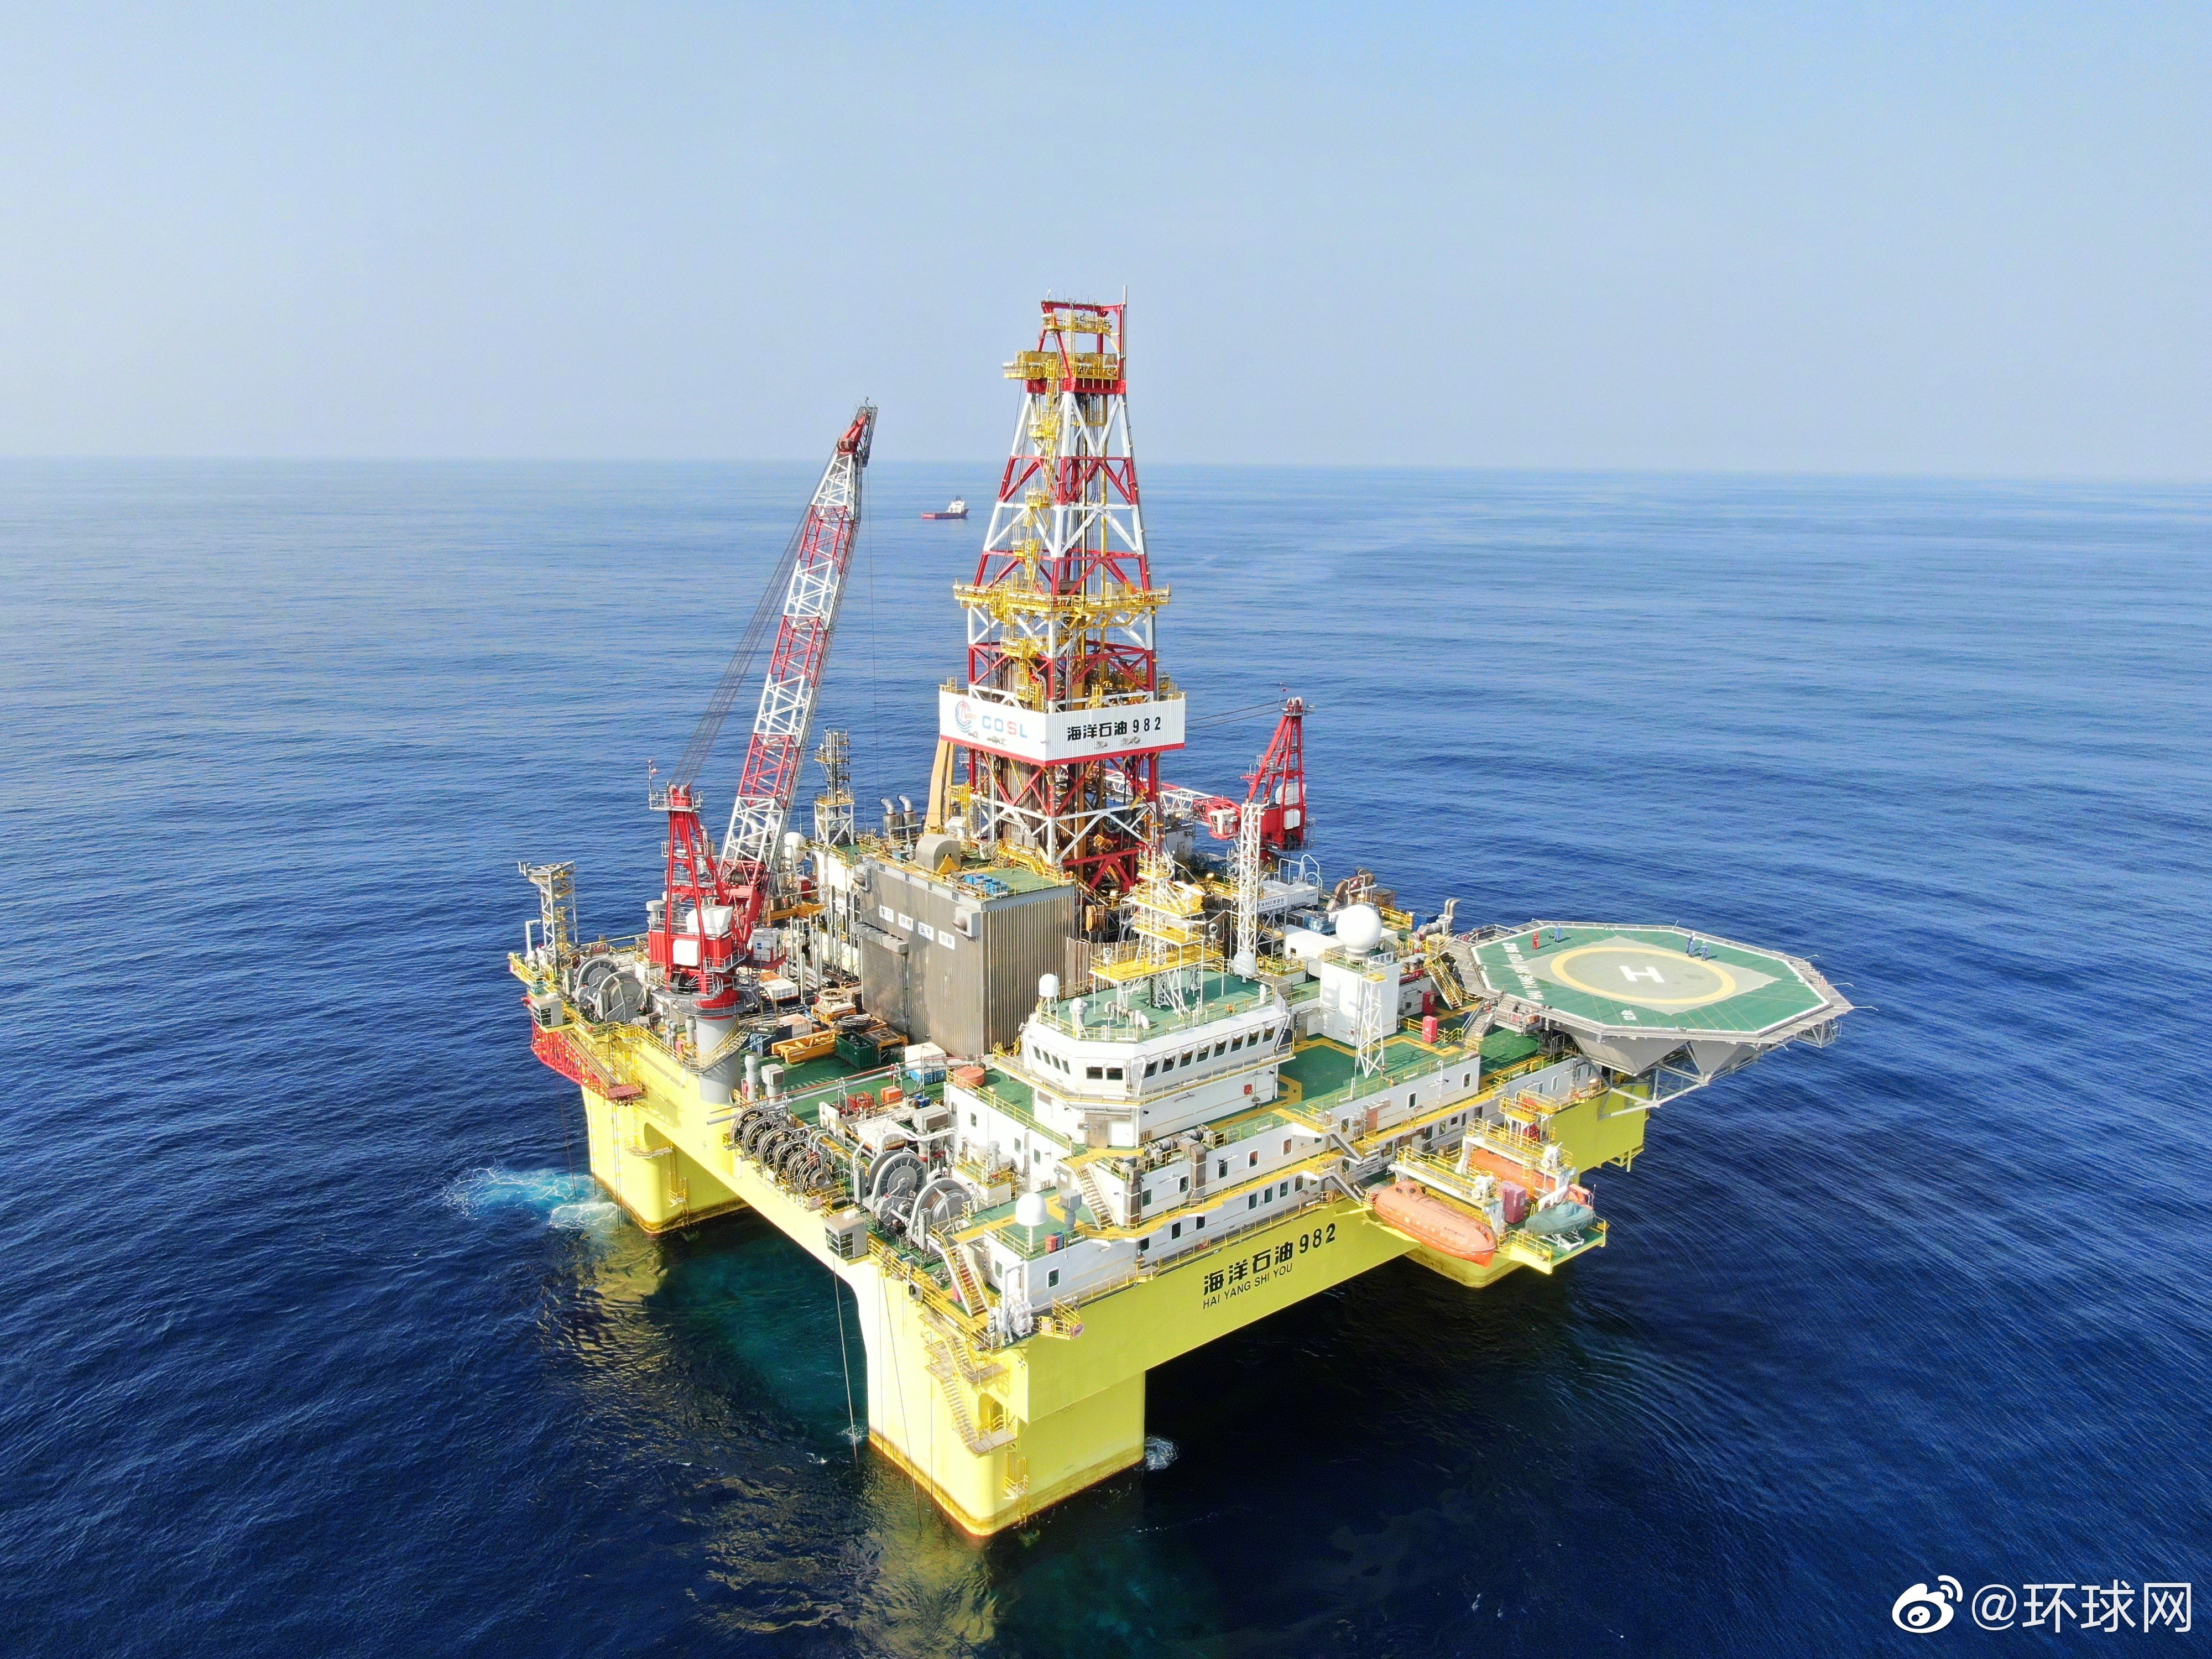 Beijing new deepwater in South China Sea South China Morning Post